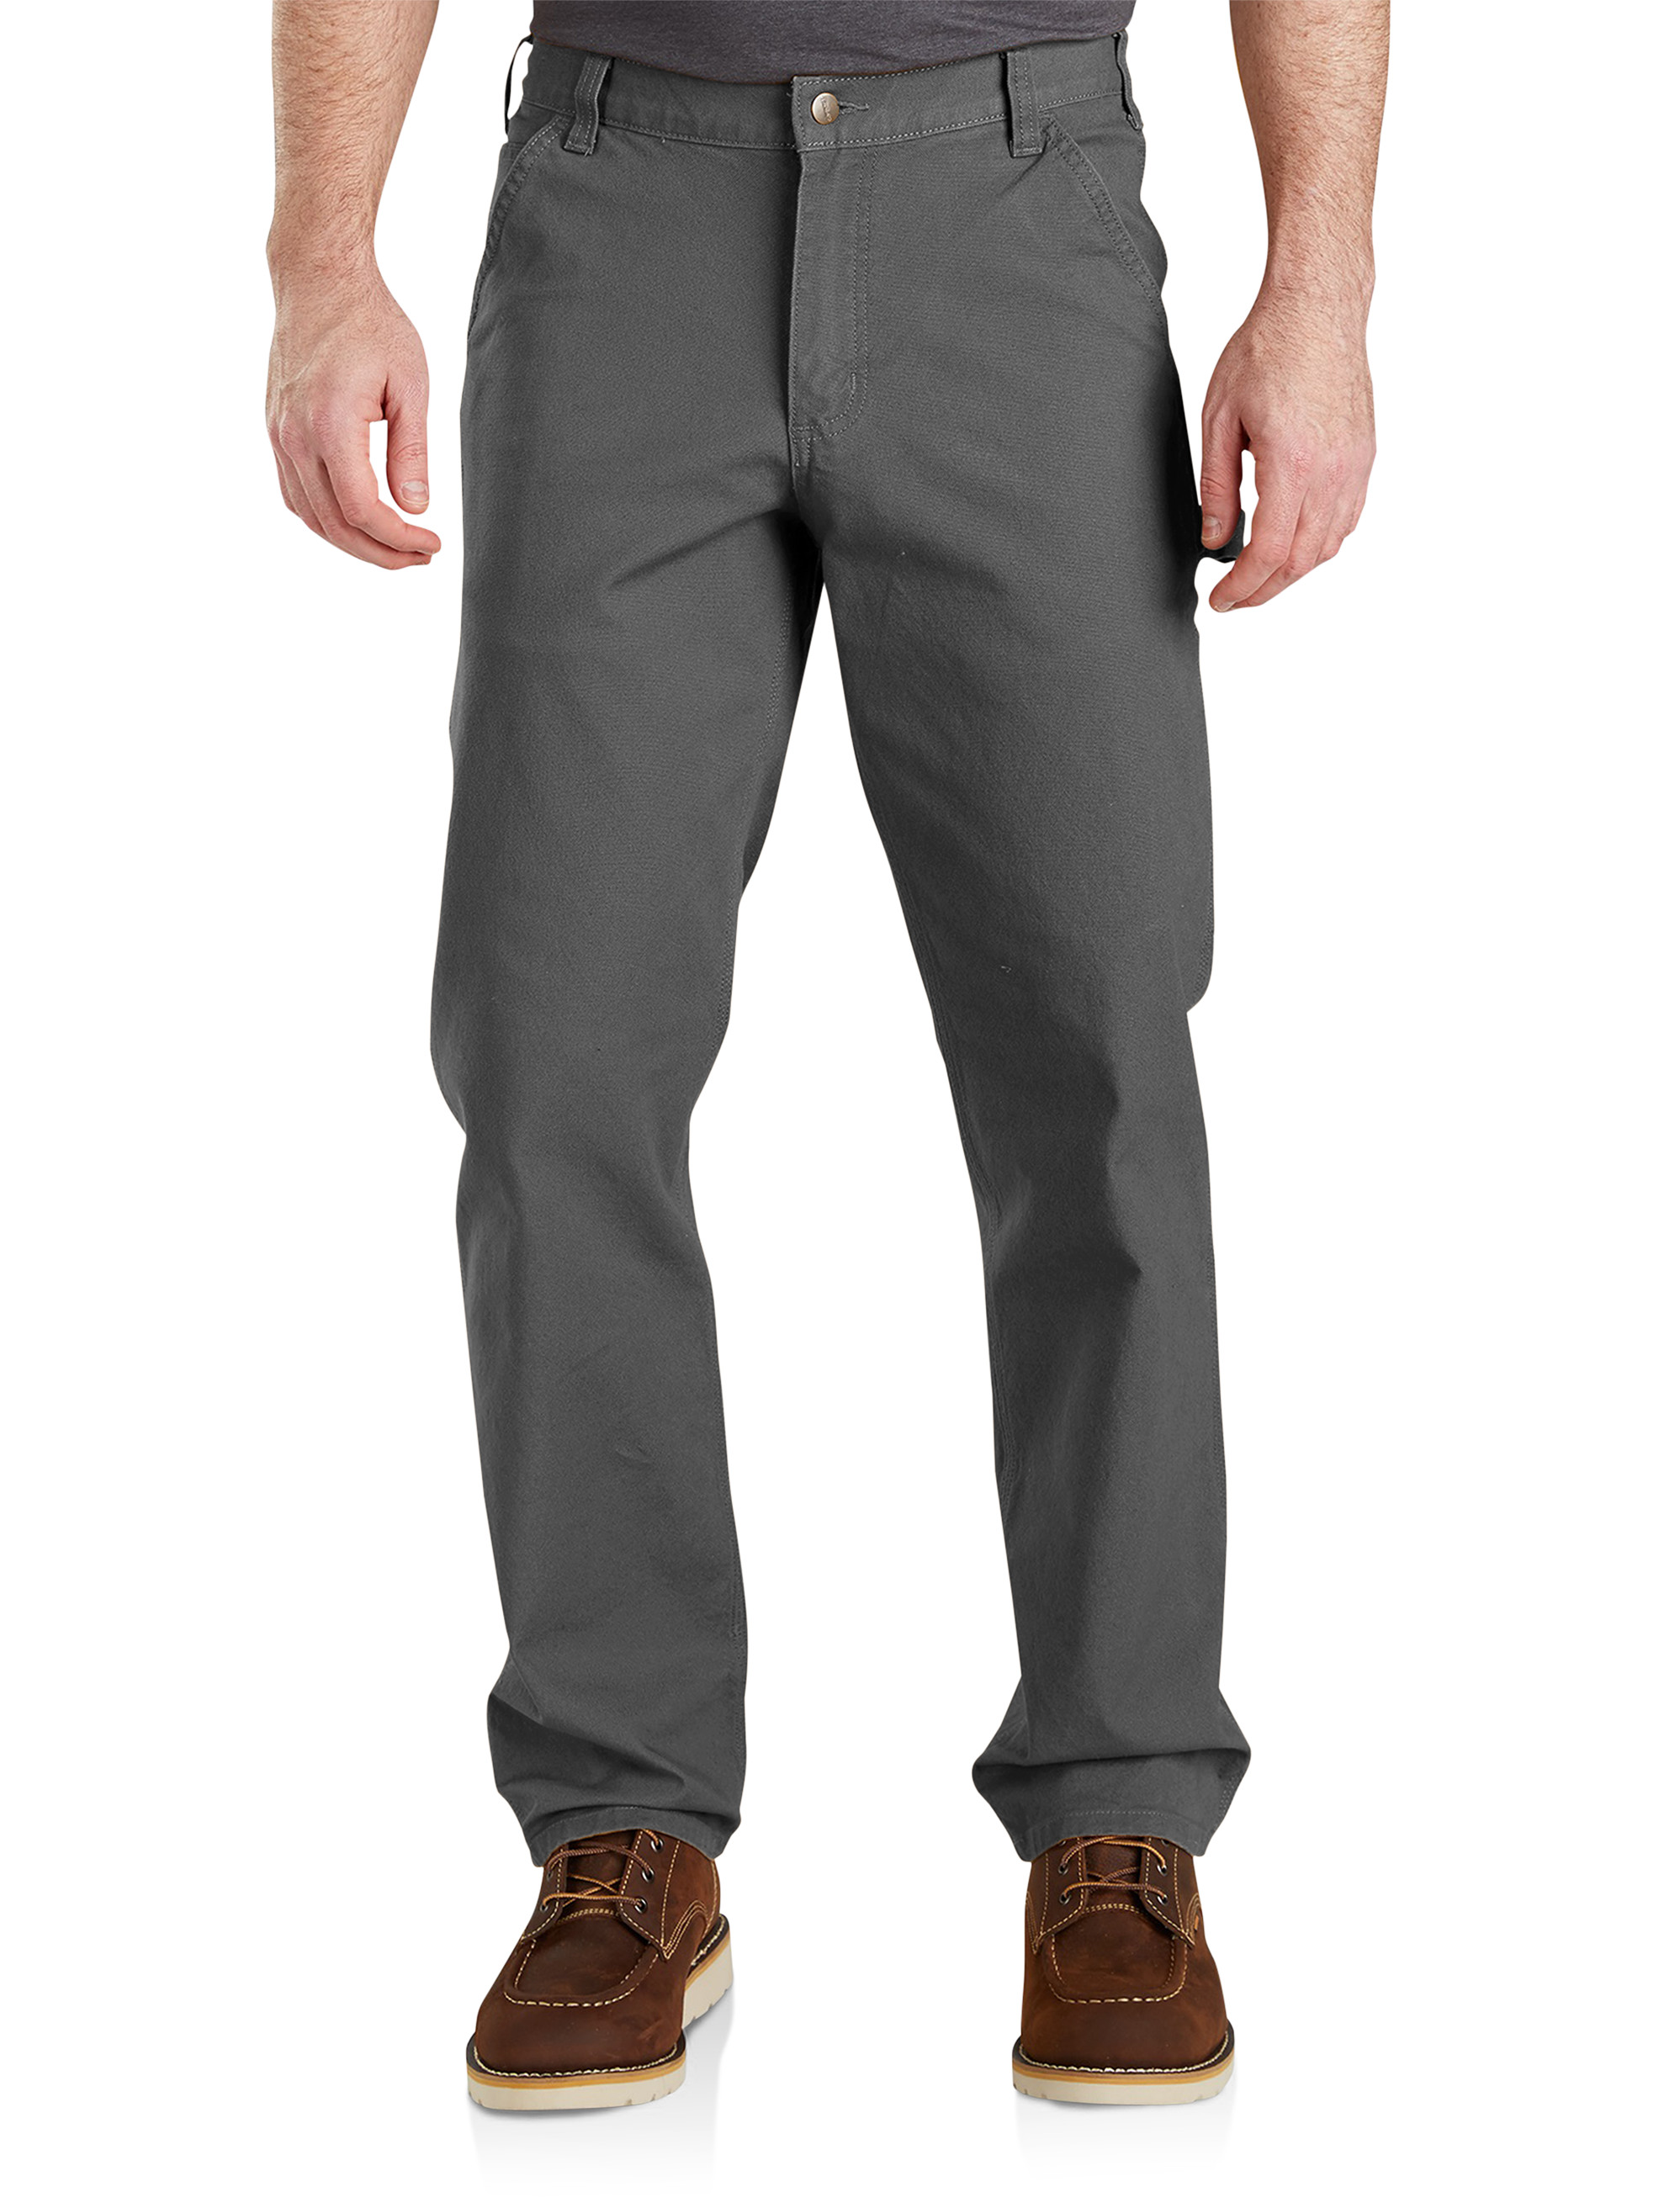 Mr Big Dry Touch Business Pants